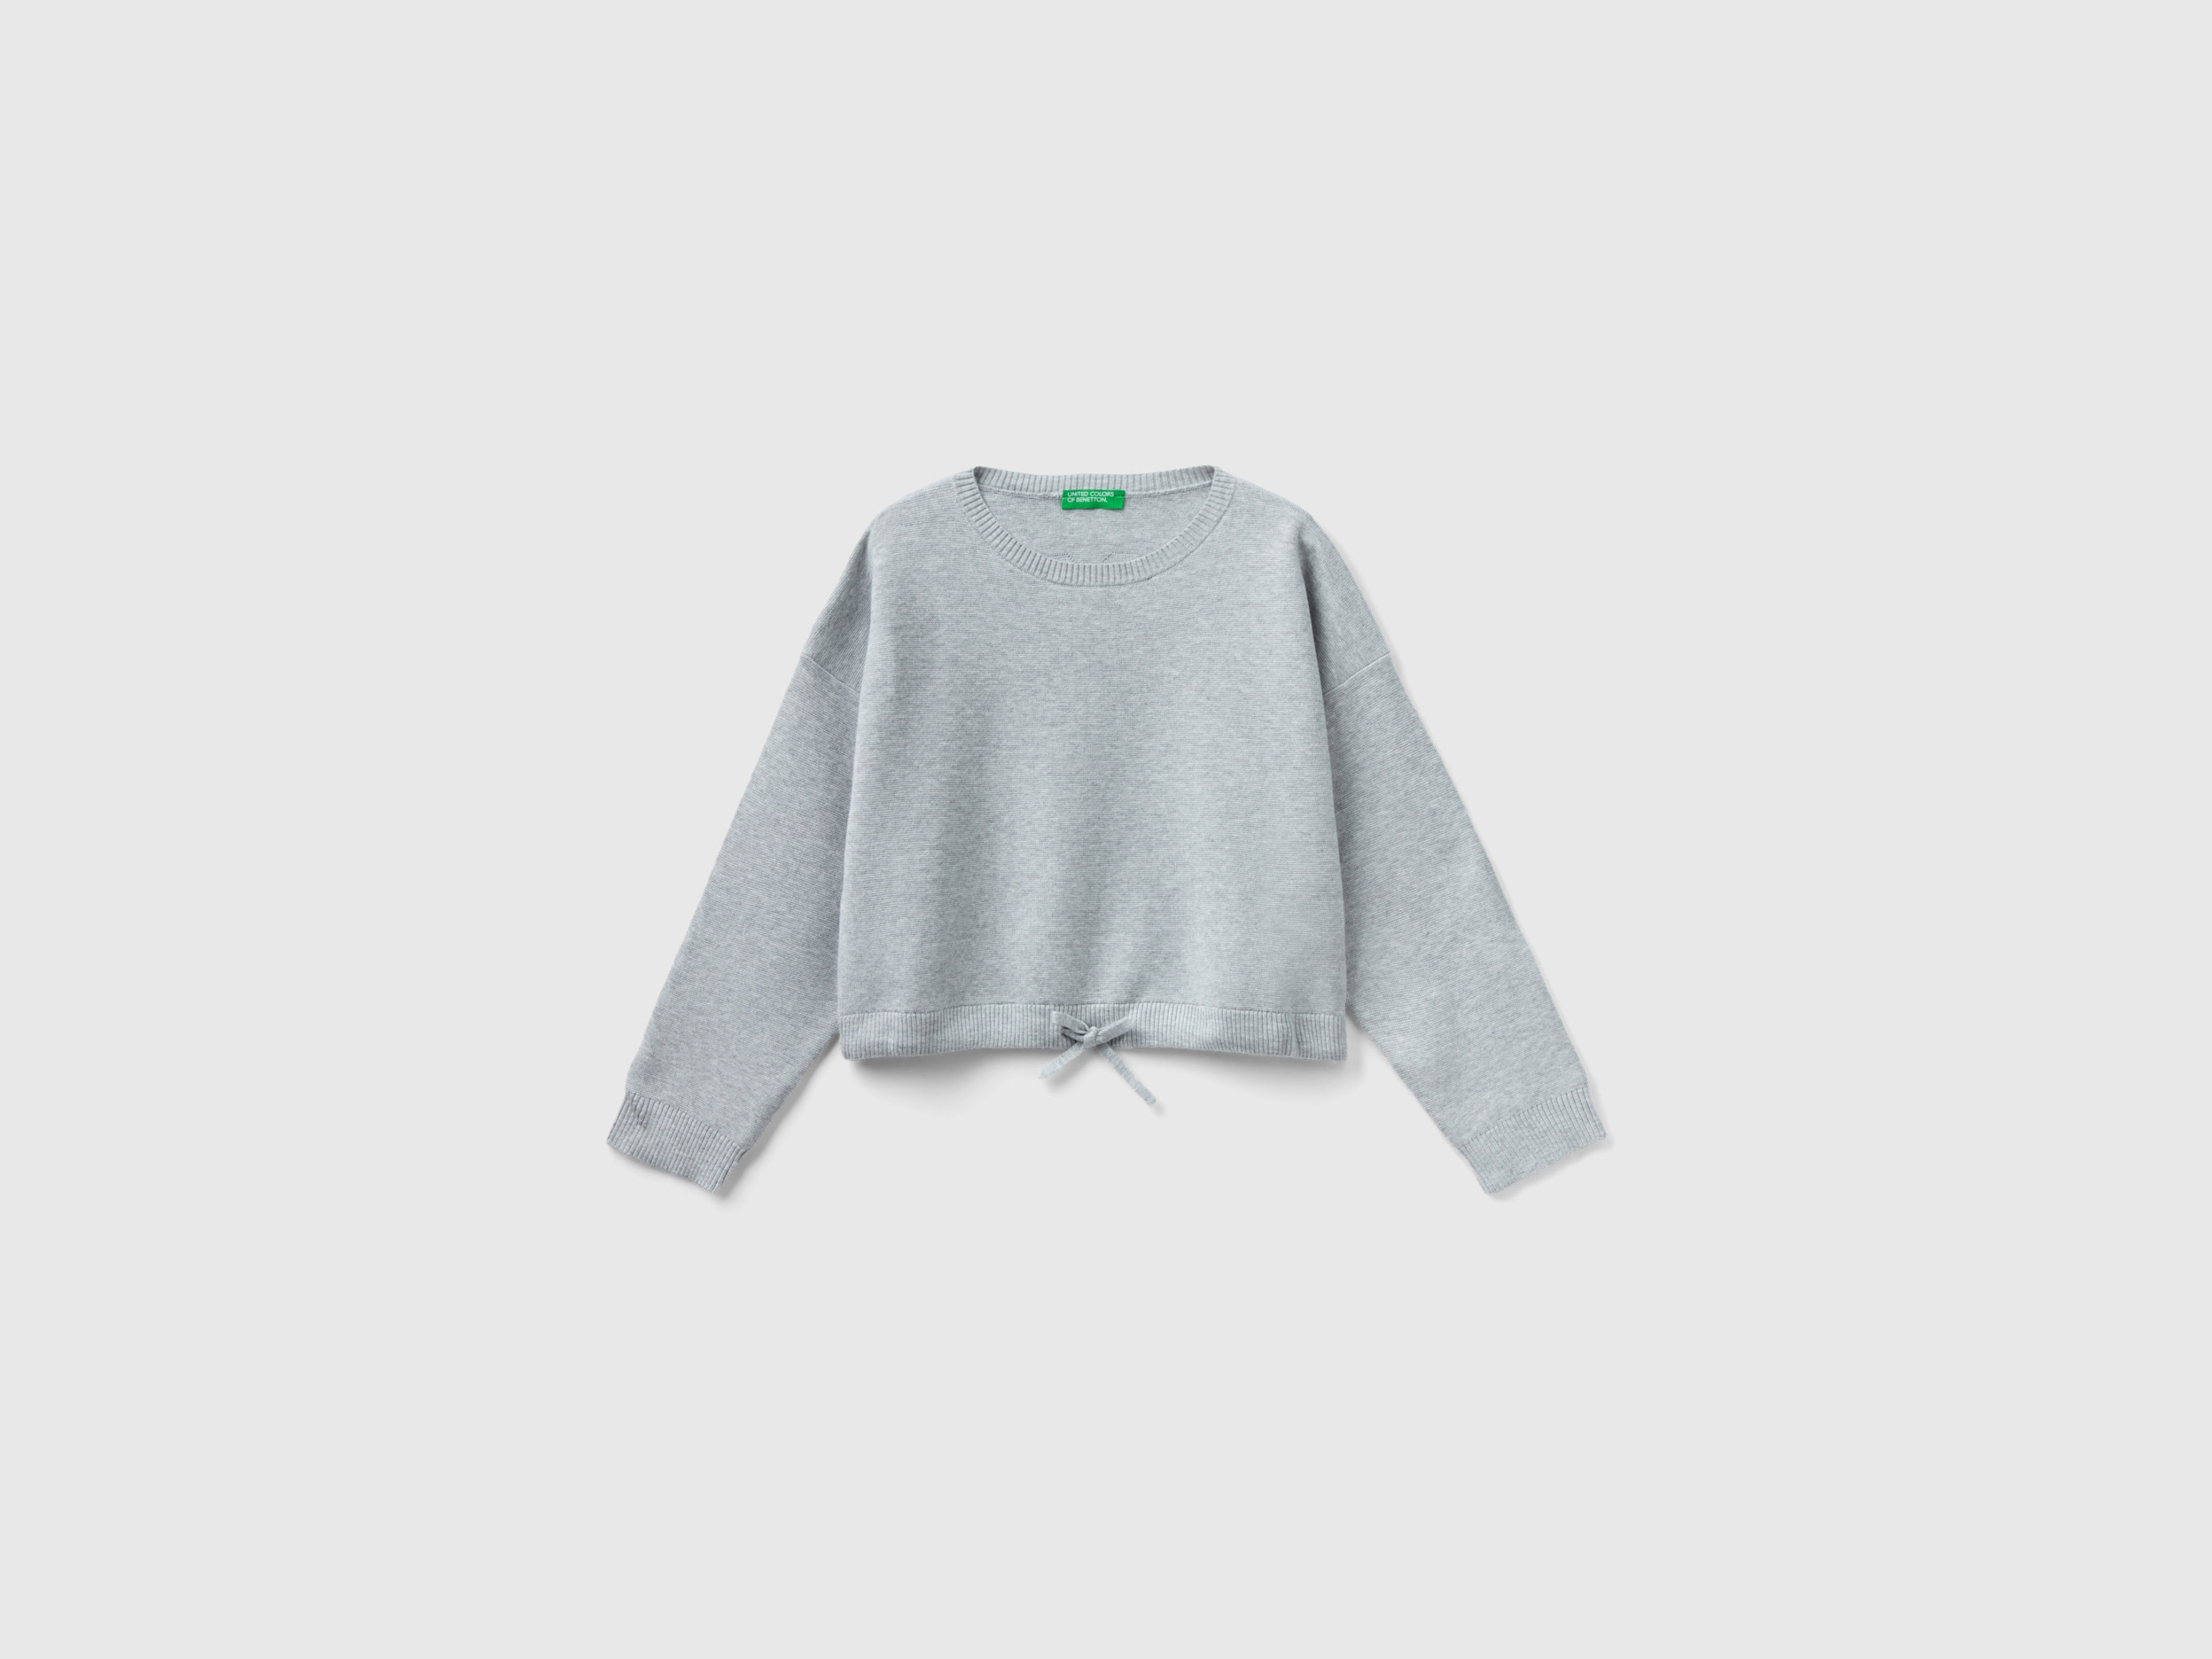 Benetton, Sweater With Drawstring, size 2XL, Gray, Kids